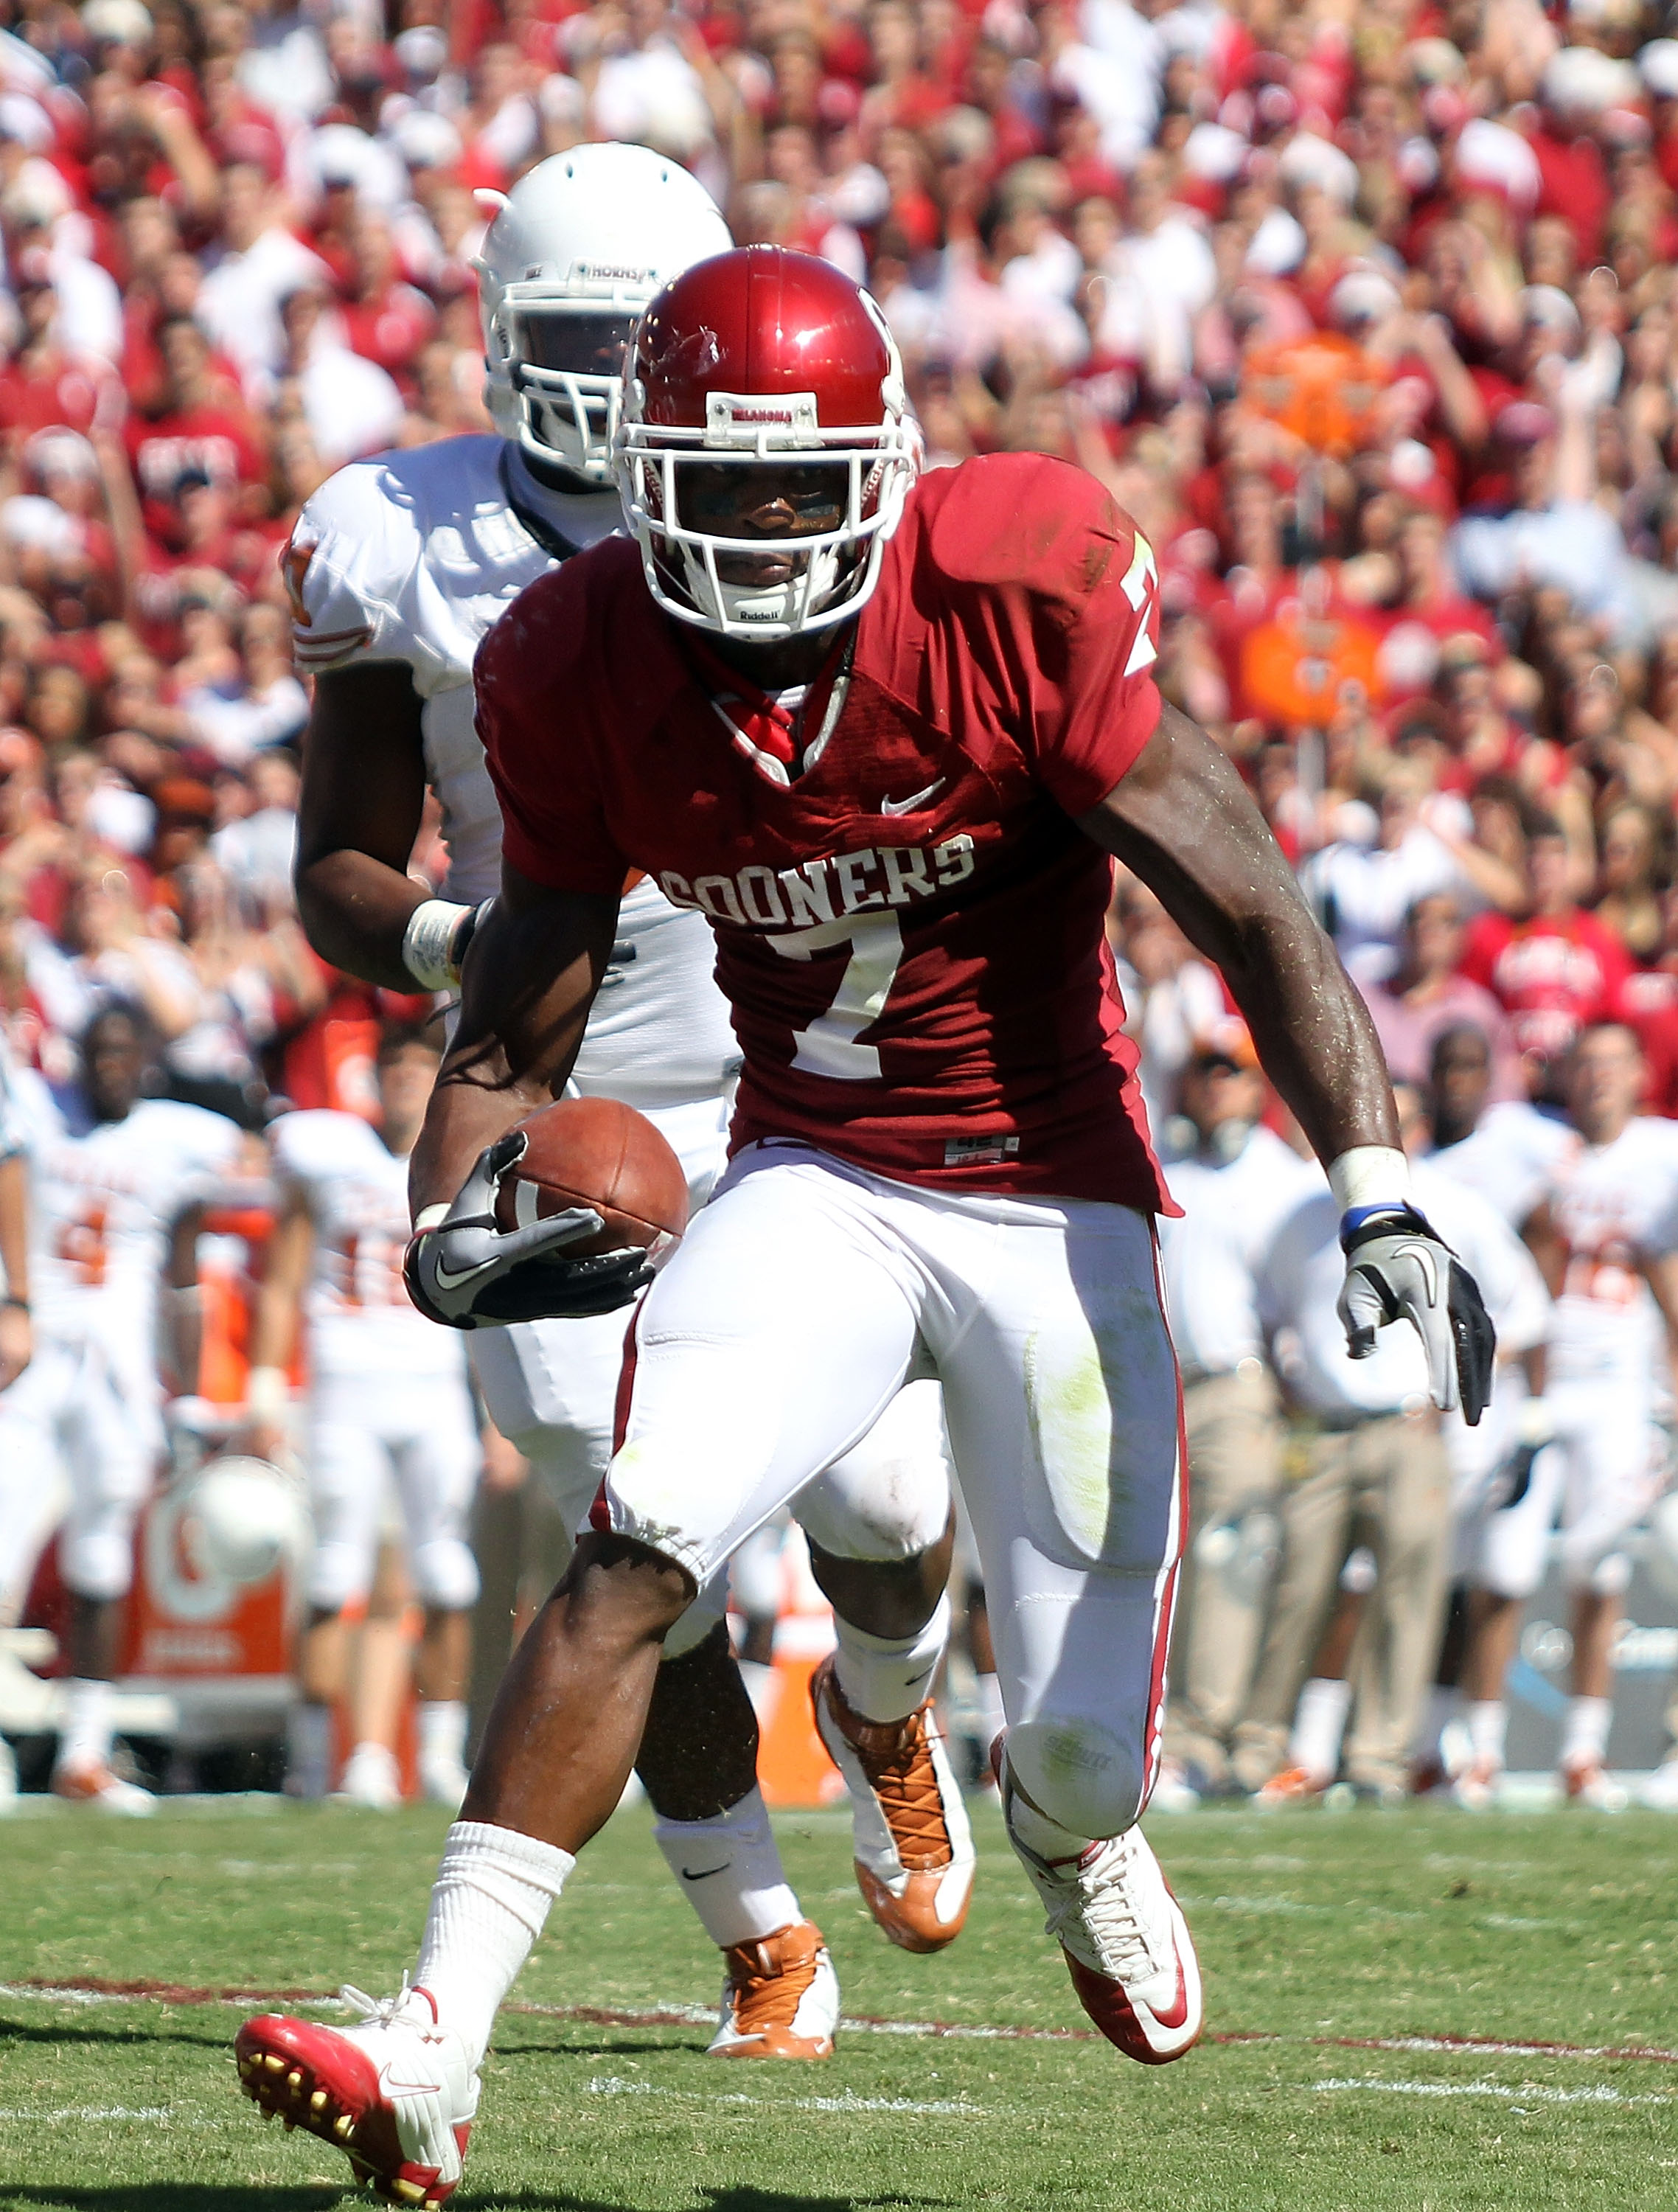 DALLAS - OCTOBER 02:  Running back Demarco Murray #7 of the Oklahoma Sooners runs for a touchdown against the Texas Longhorns in the first quarter at the Cotton Bowl on October 2, 2010 in Dallas, Texas.  (Photo by Ronald Martinez/Getty Images)